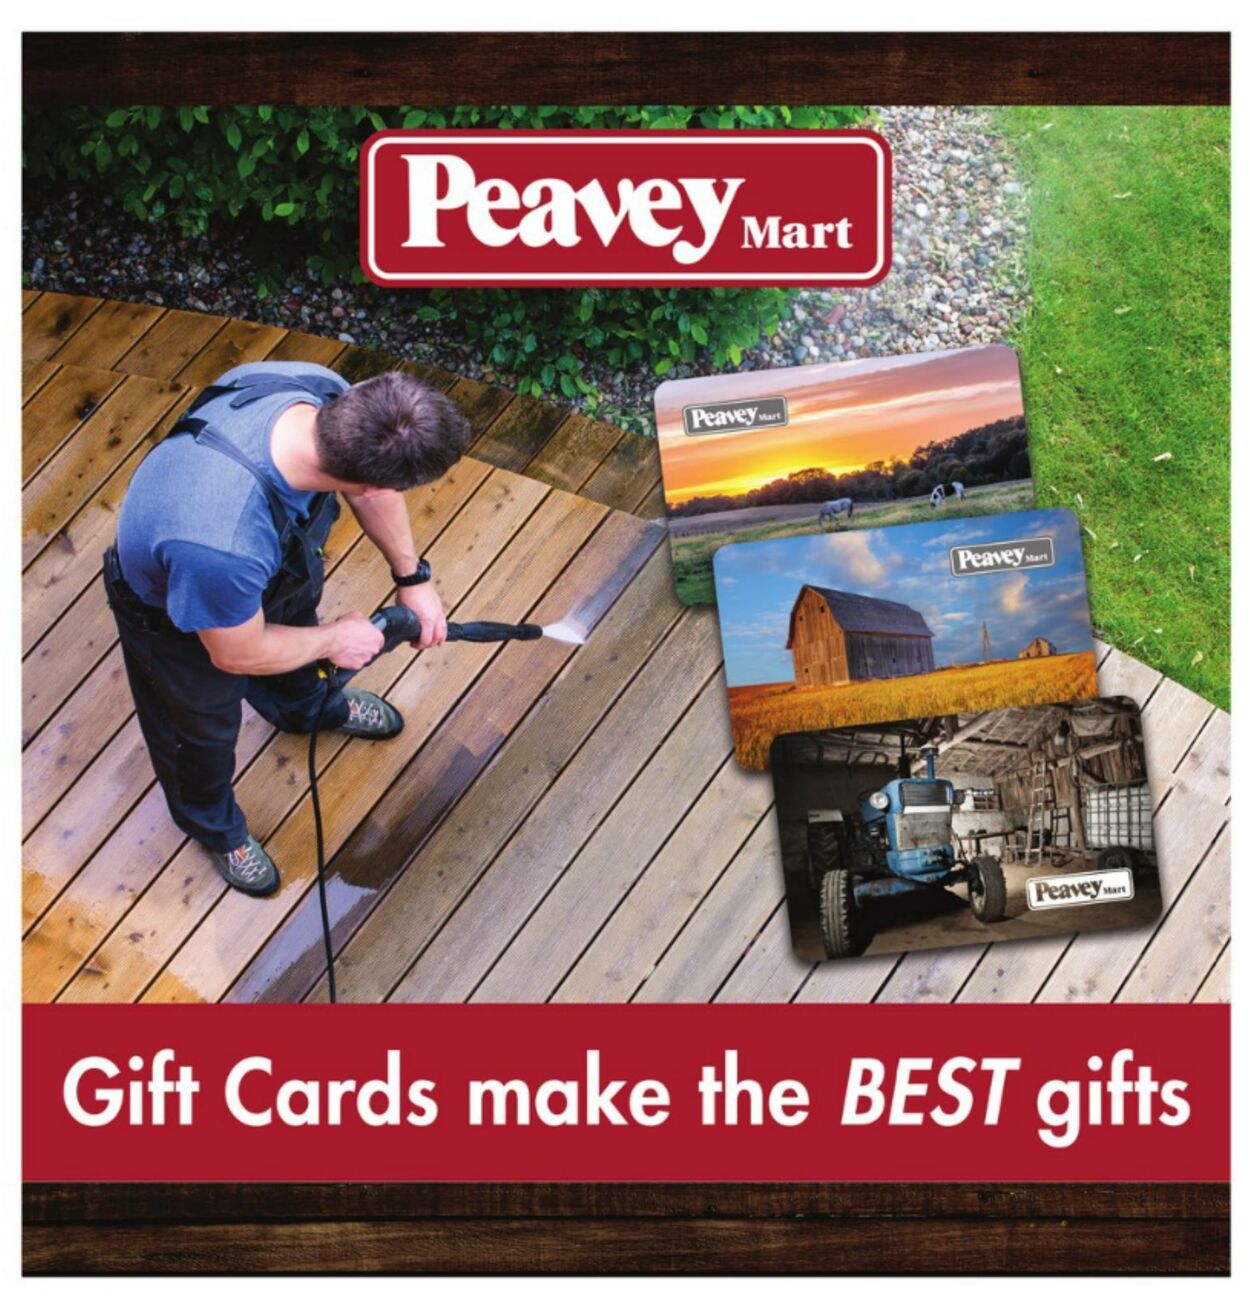 Peavey Mart Flyer from 04/12/2024